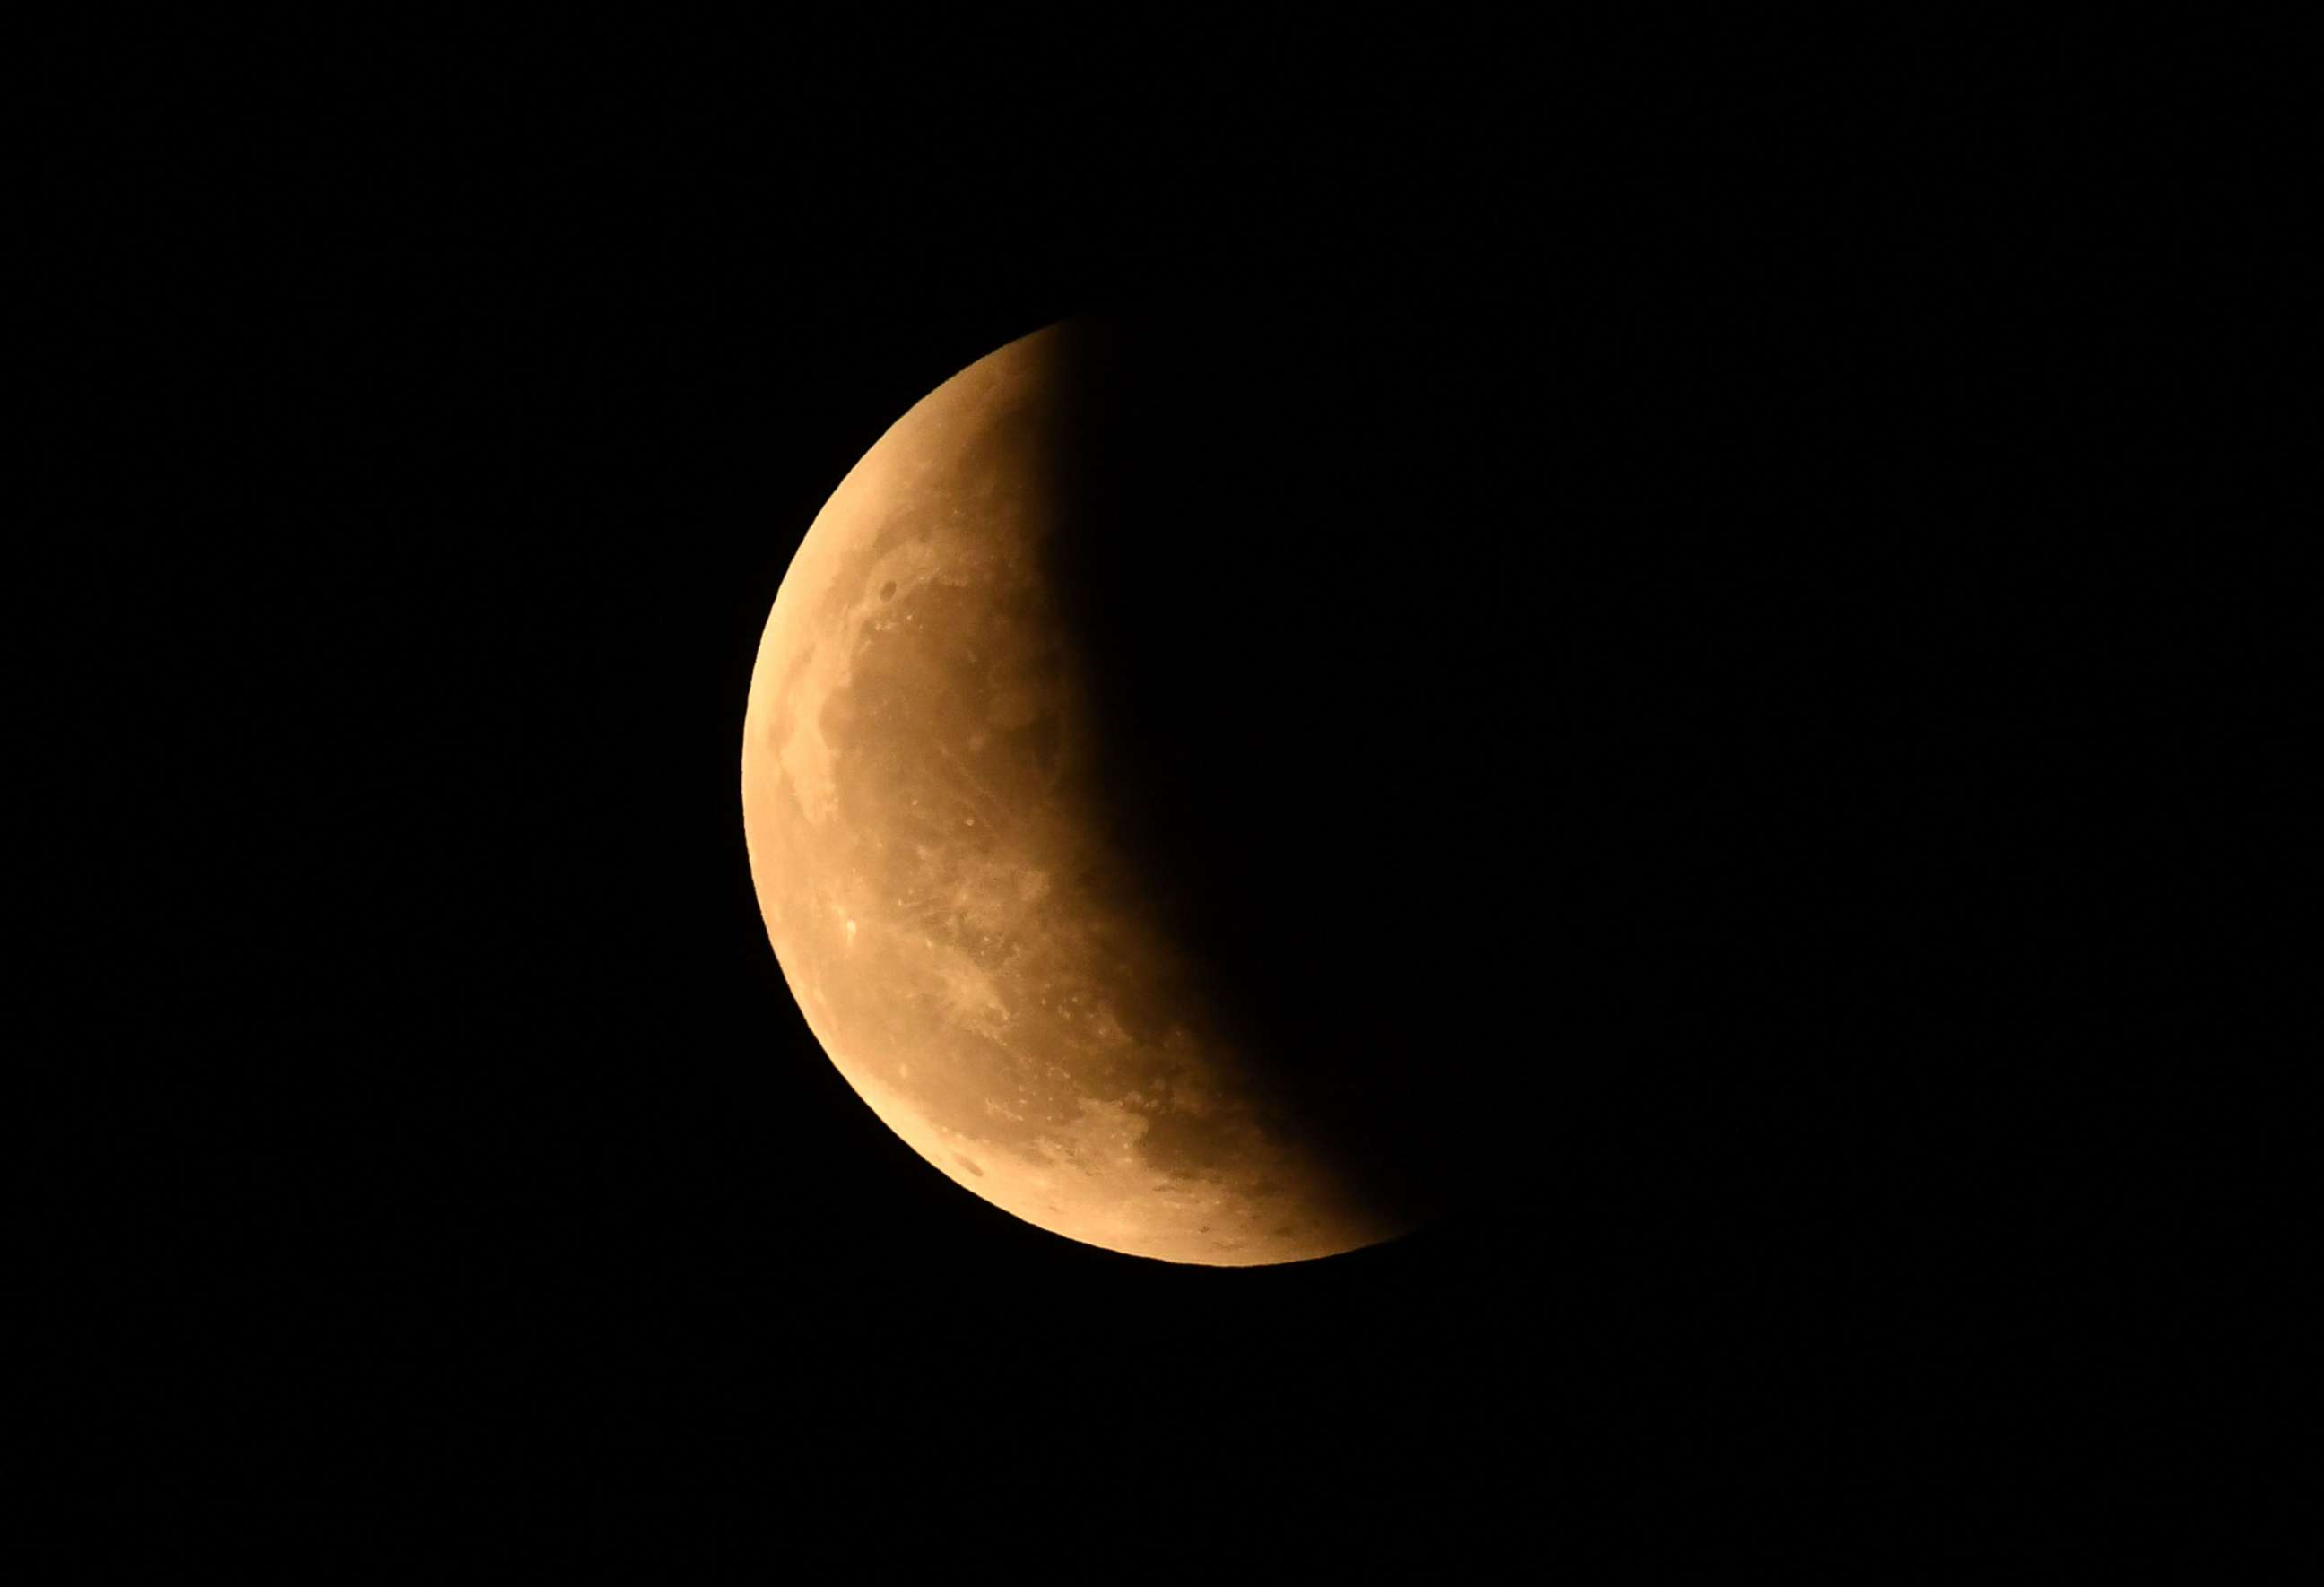 PHOTO: The "Blood Moon" is seen during a total lunar eclipse in Guwahatii on Nov. 8, 2022.